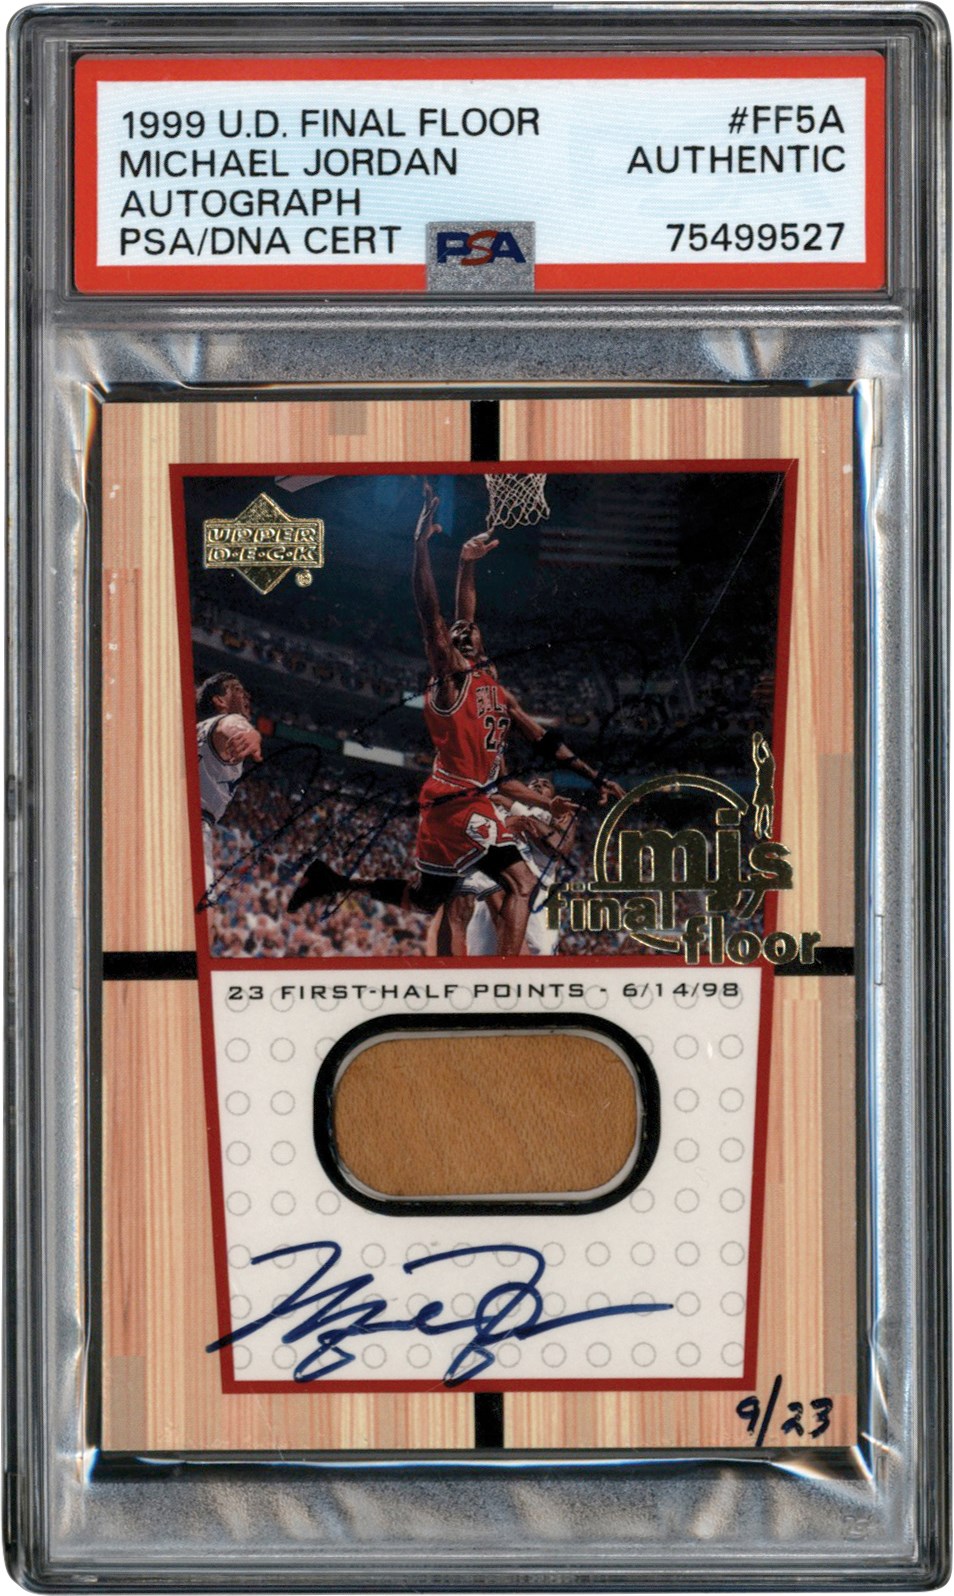 Only Known 1999-2000 Upper Deck MJ's Final Floor #FF5A Michael Jordan TWICE Signed Game Used Floor Autograph Card #9/23 PSA Authentic